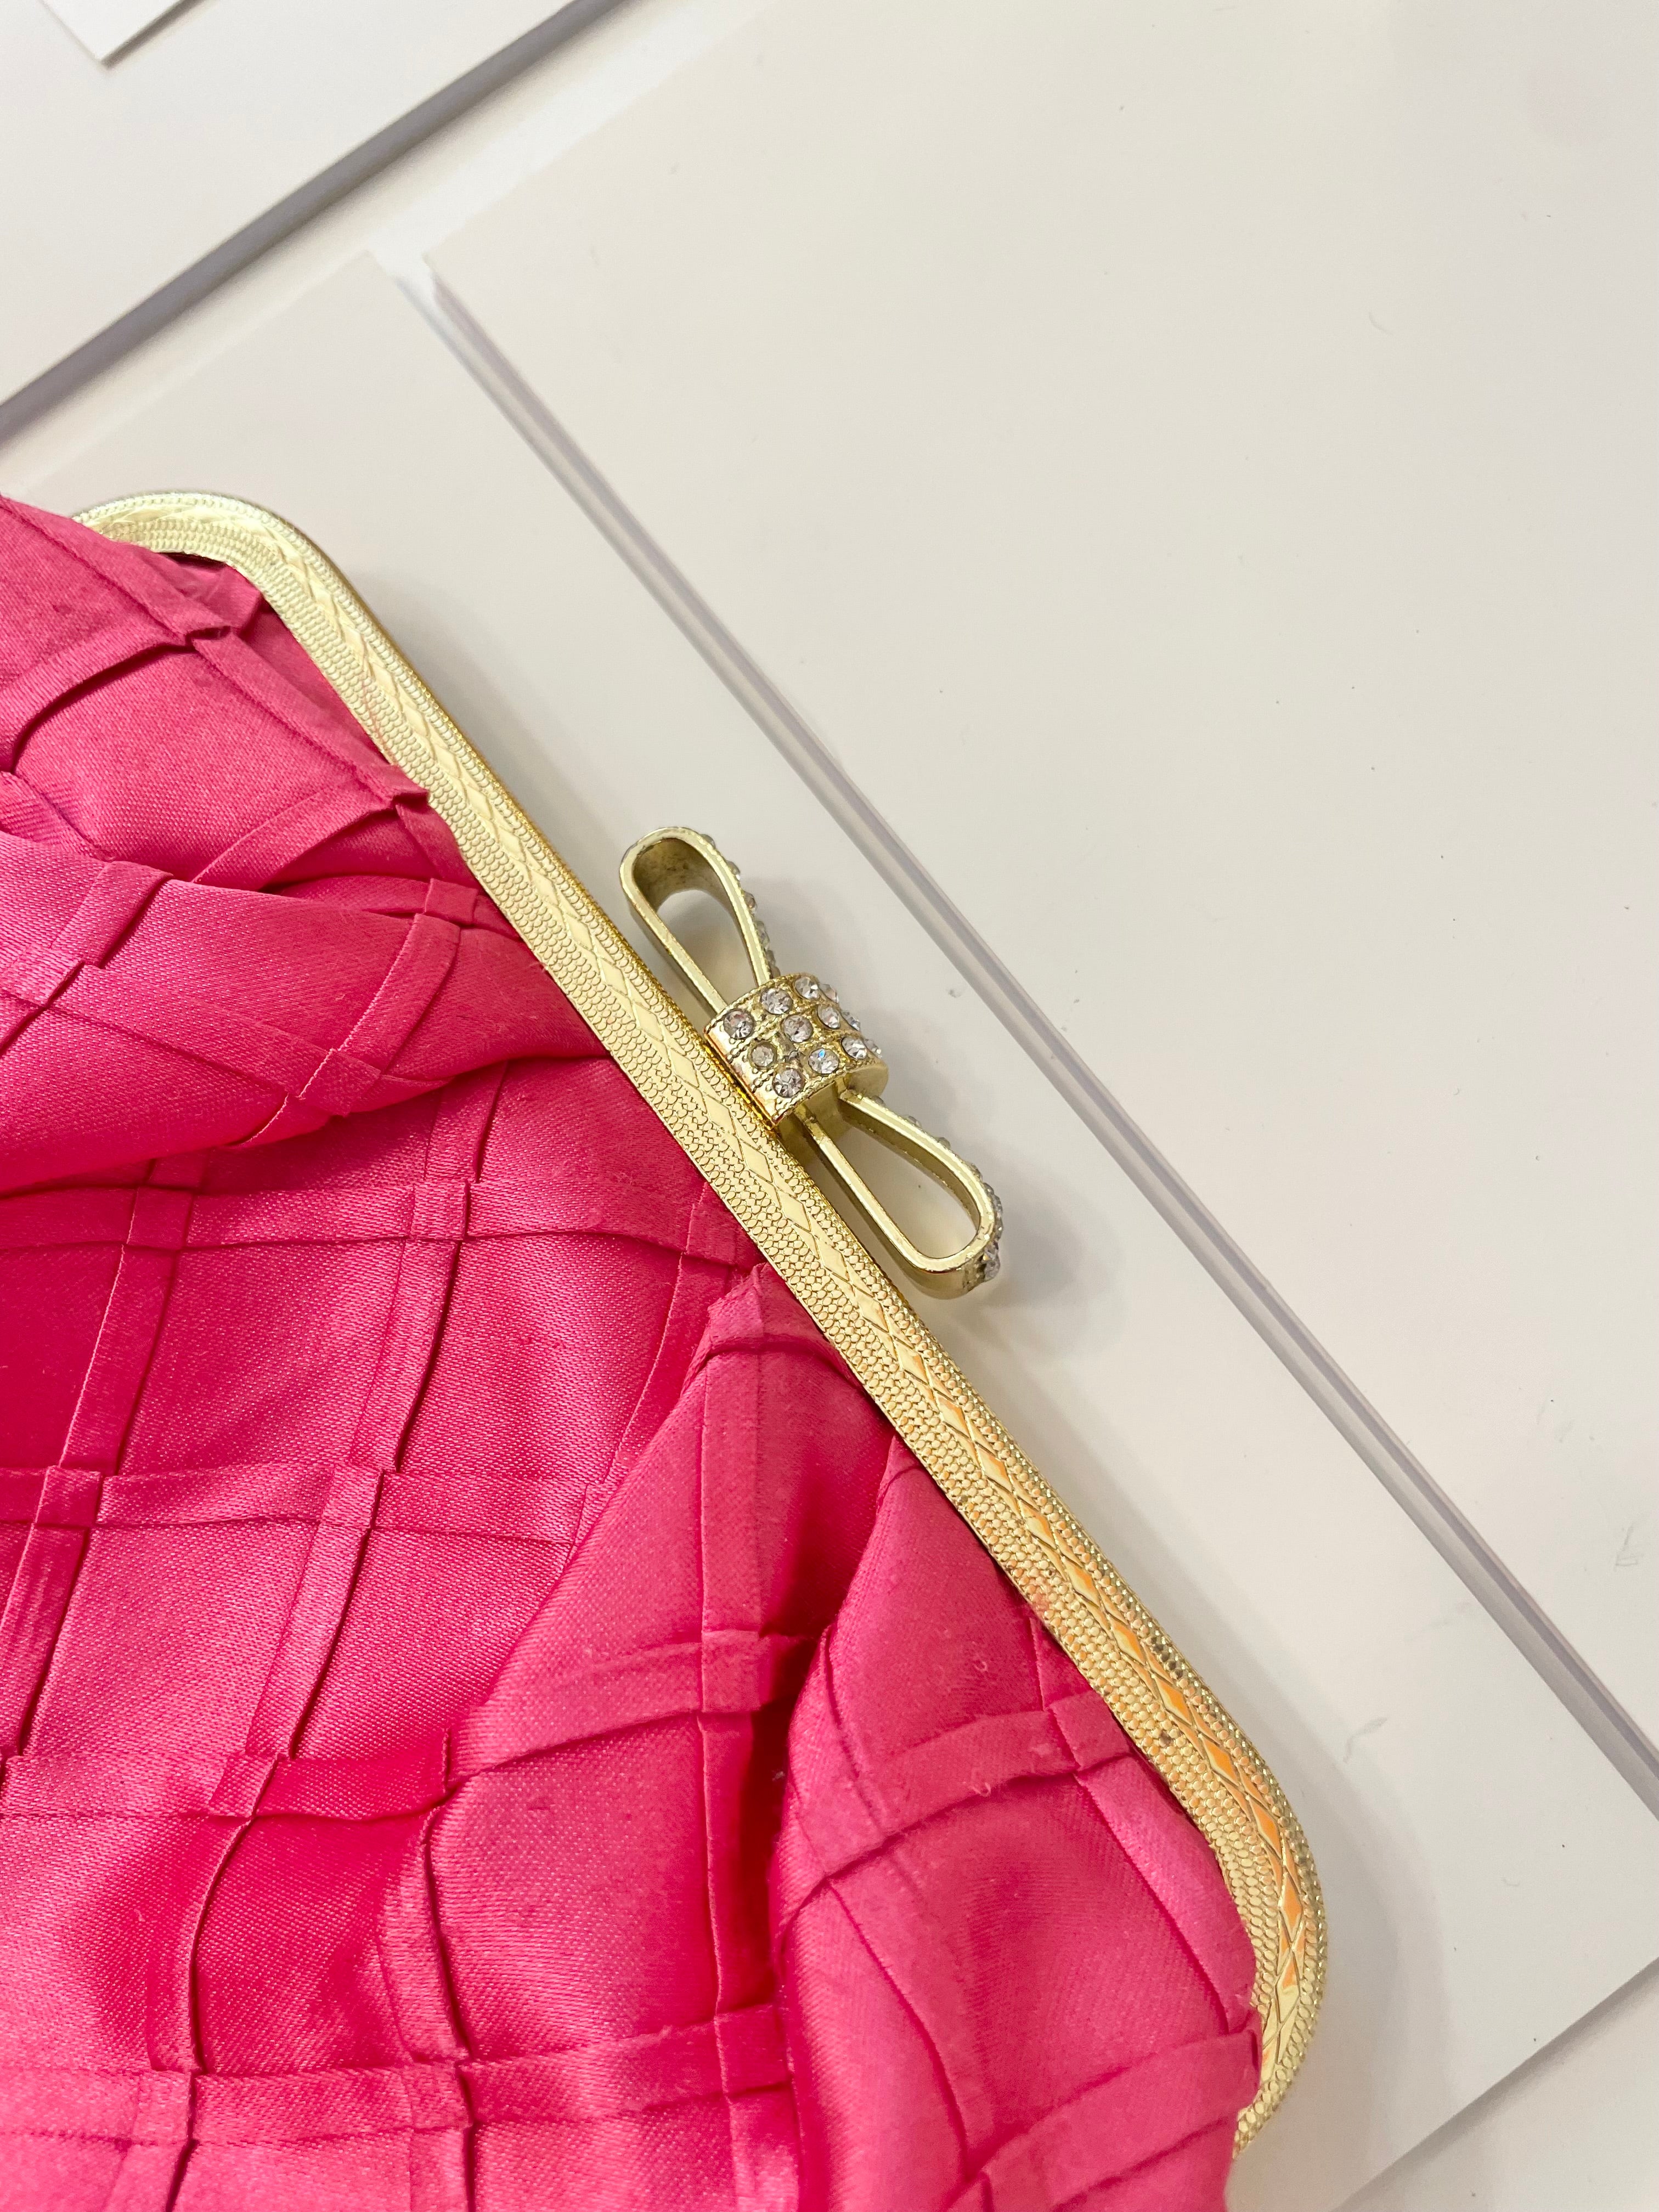 The Flirty gal loves a sassy pink satin evening bag.... so chic